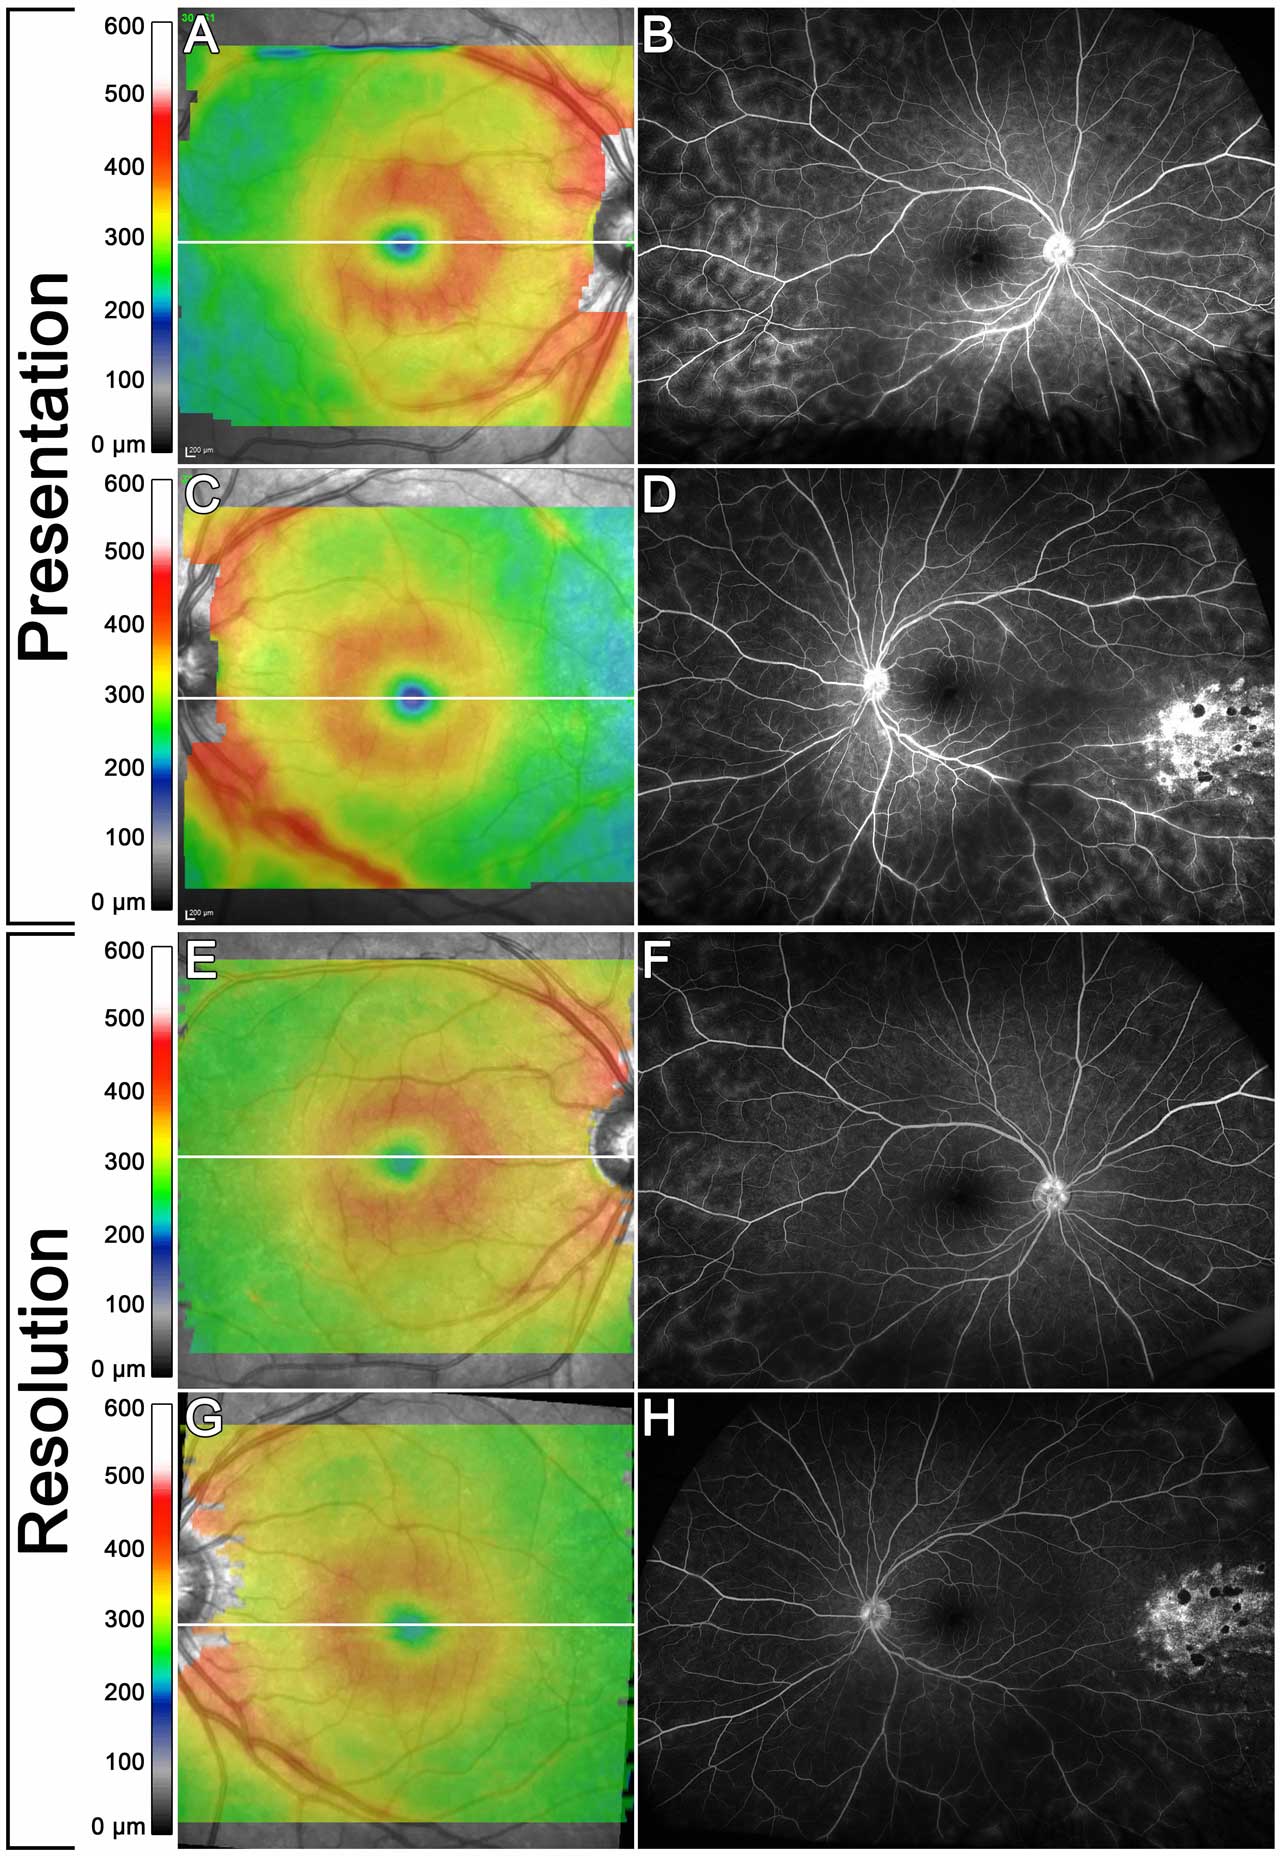 Figure 2. A 17-year-old male with intermediate uveitis and retinal vasculitis in both eyes. On presentation, retinal thickness maps demonstrate perivascular and perifoveal thickening in both eyes (A, C). Late frames of fluorescein angiography demonstrate large-vessel vasculitis in the midperiphery more in the right than left eye, with staining of laser scars temporally in the left eye (B, D). After treatment, retinal thickness maps show significant reduction of perivascular thickness (E, G). Fluorescein angiography shows significant improvement of vasculitis (F, H).